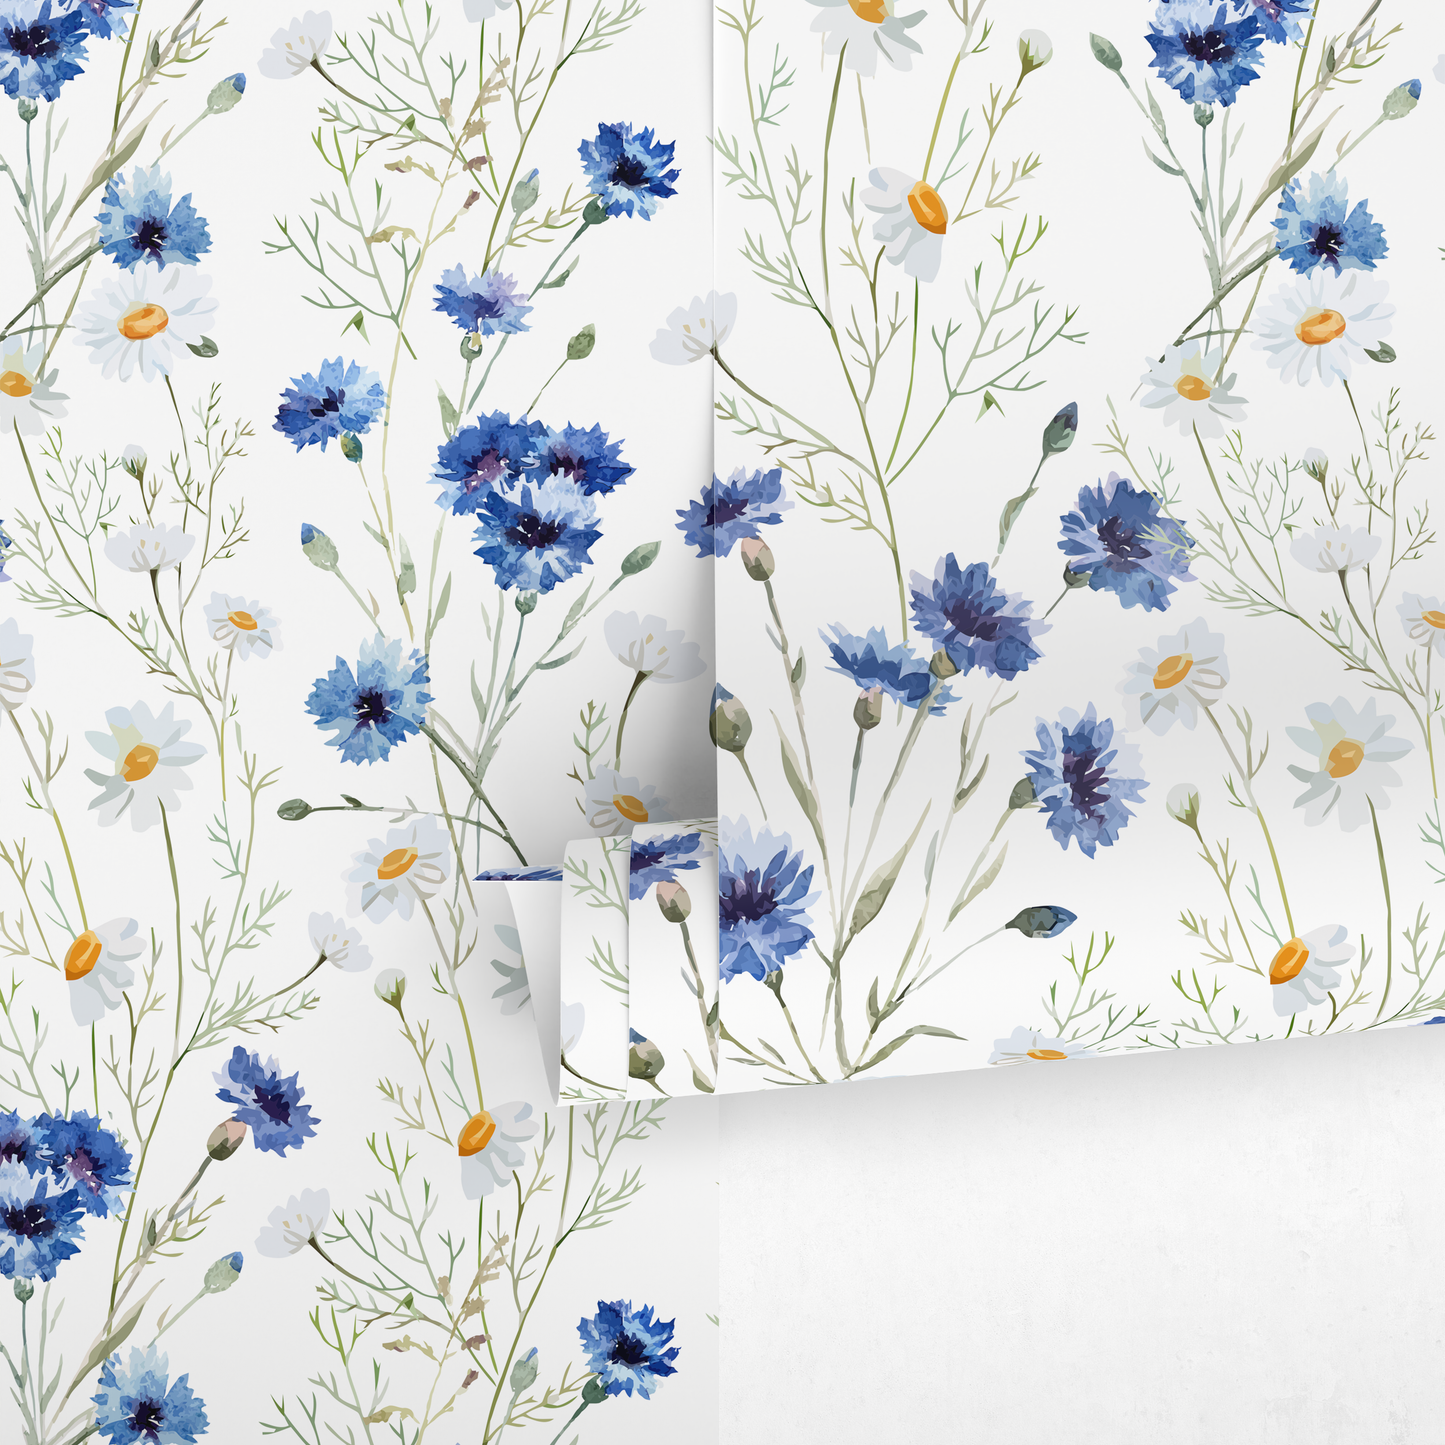 Wallpaper Peel and Stick Wallpaper Removable Wallpaper Home Decor Wall Art Wall Decor Room Decor / Flue Floral and Daisies Wallpaper -  A143